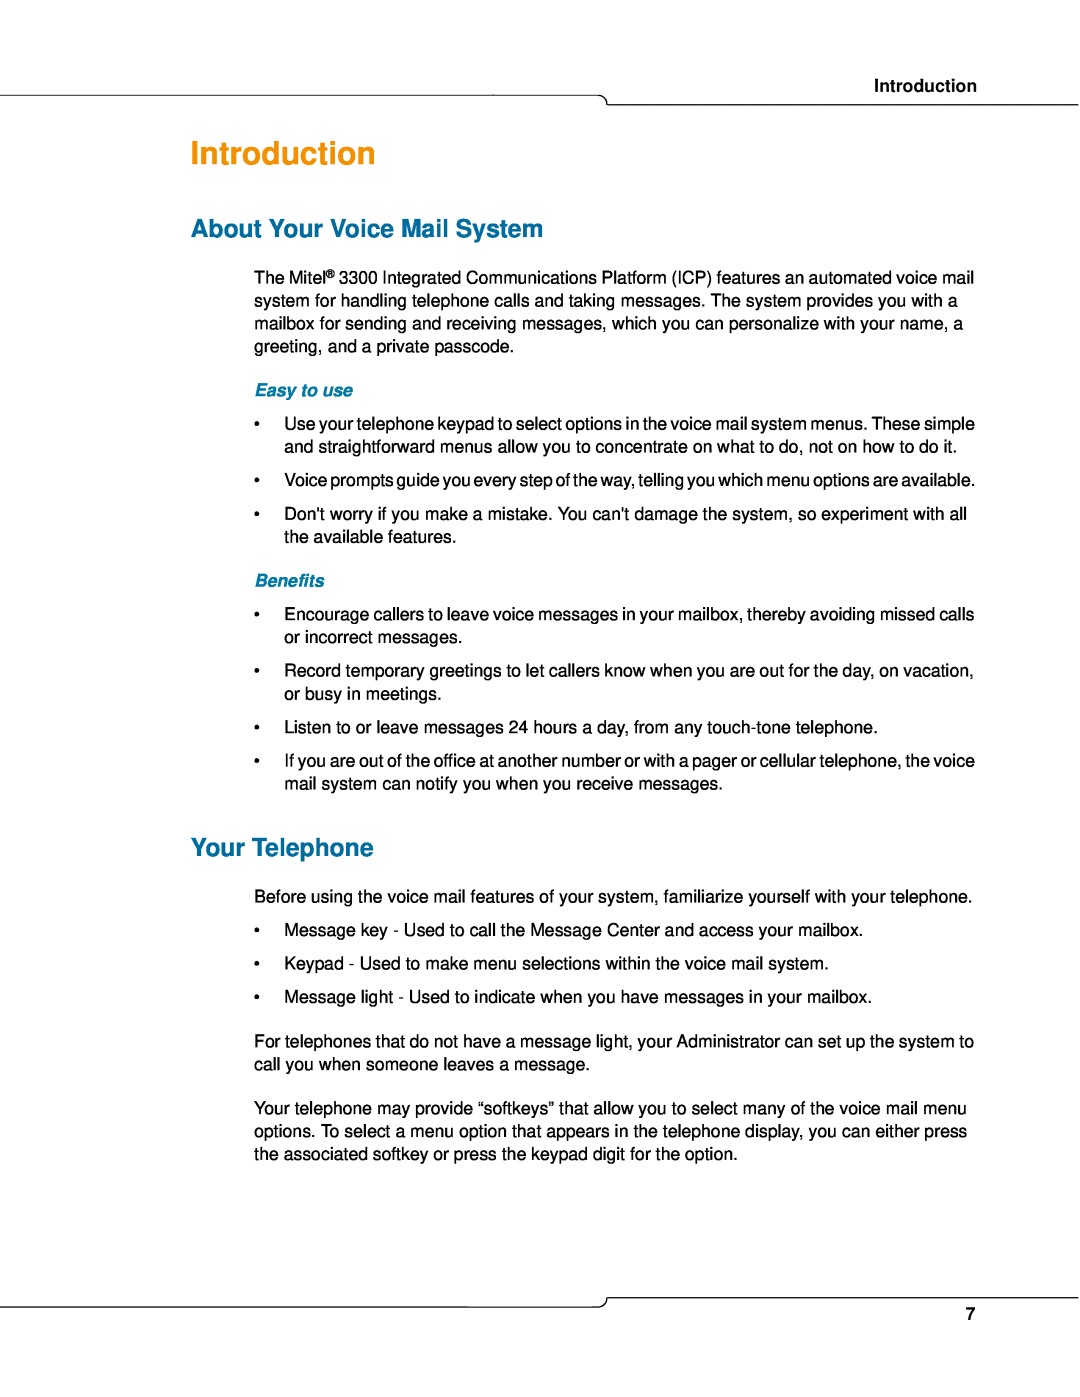 Mitel 3300 manual Introduction, About Your Voice Mail System, Your Telephone 